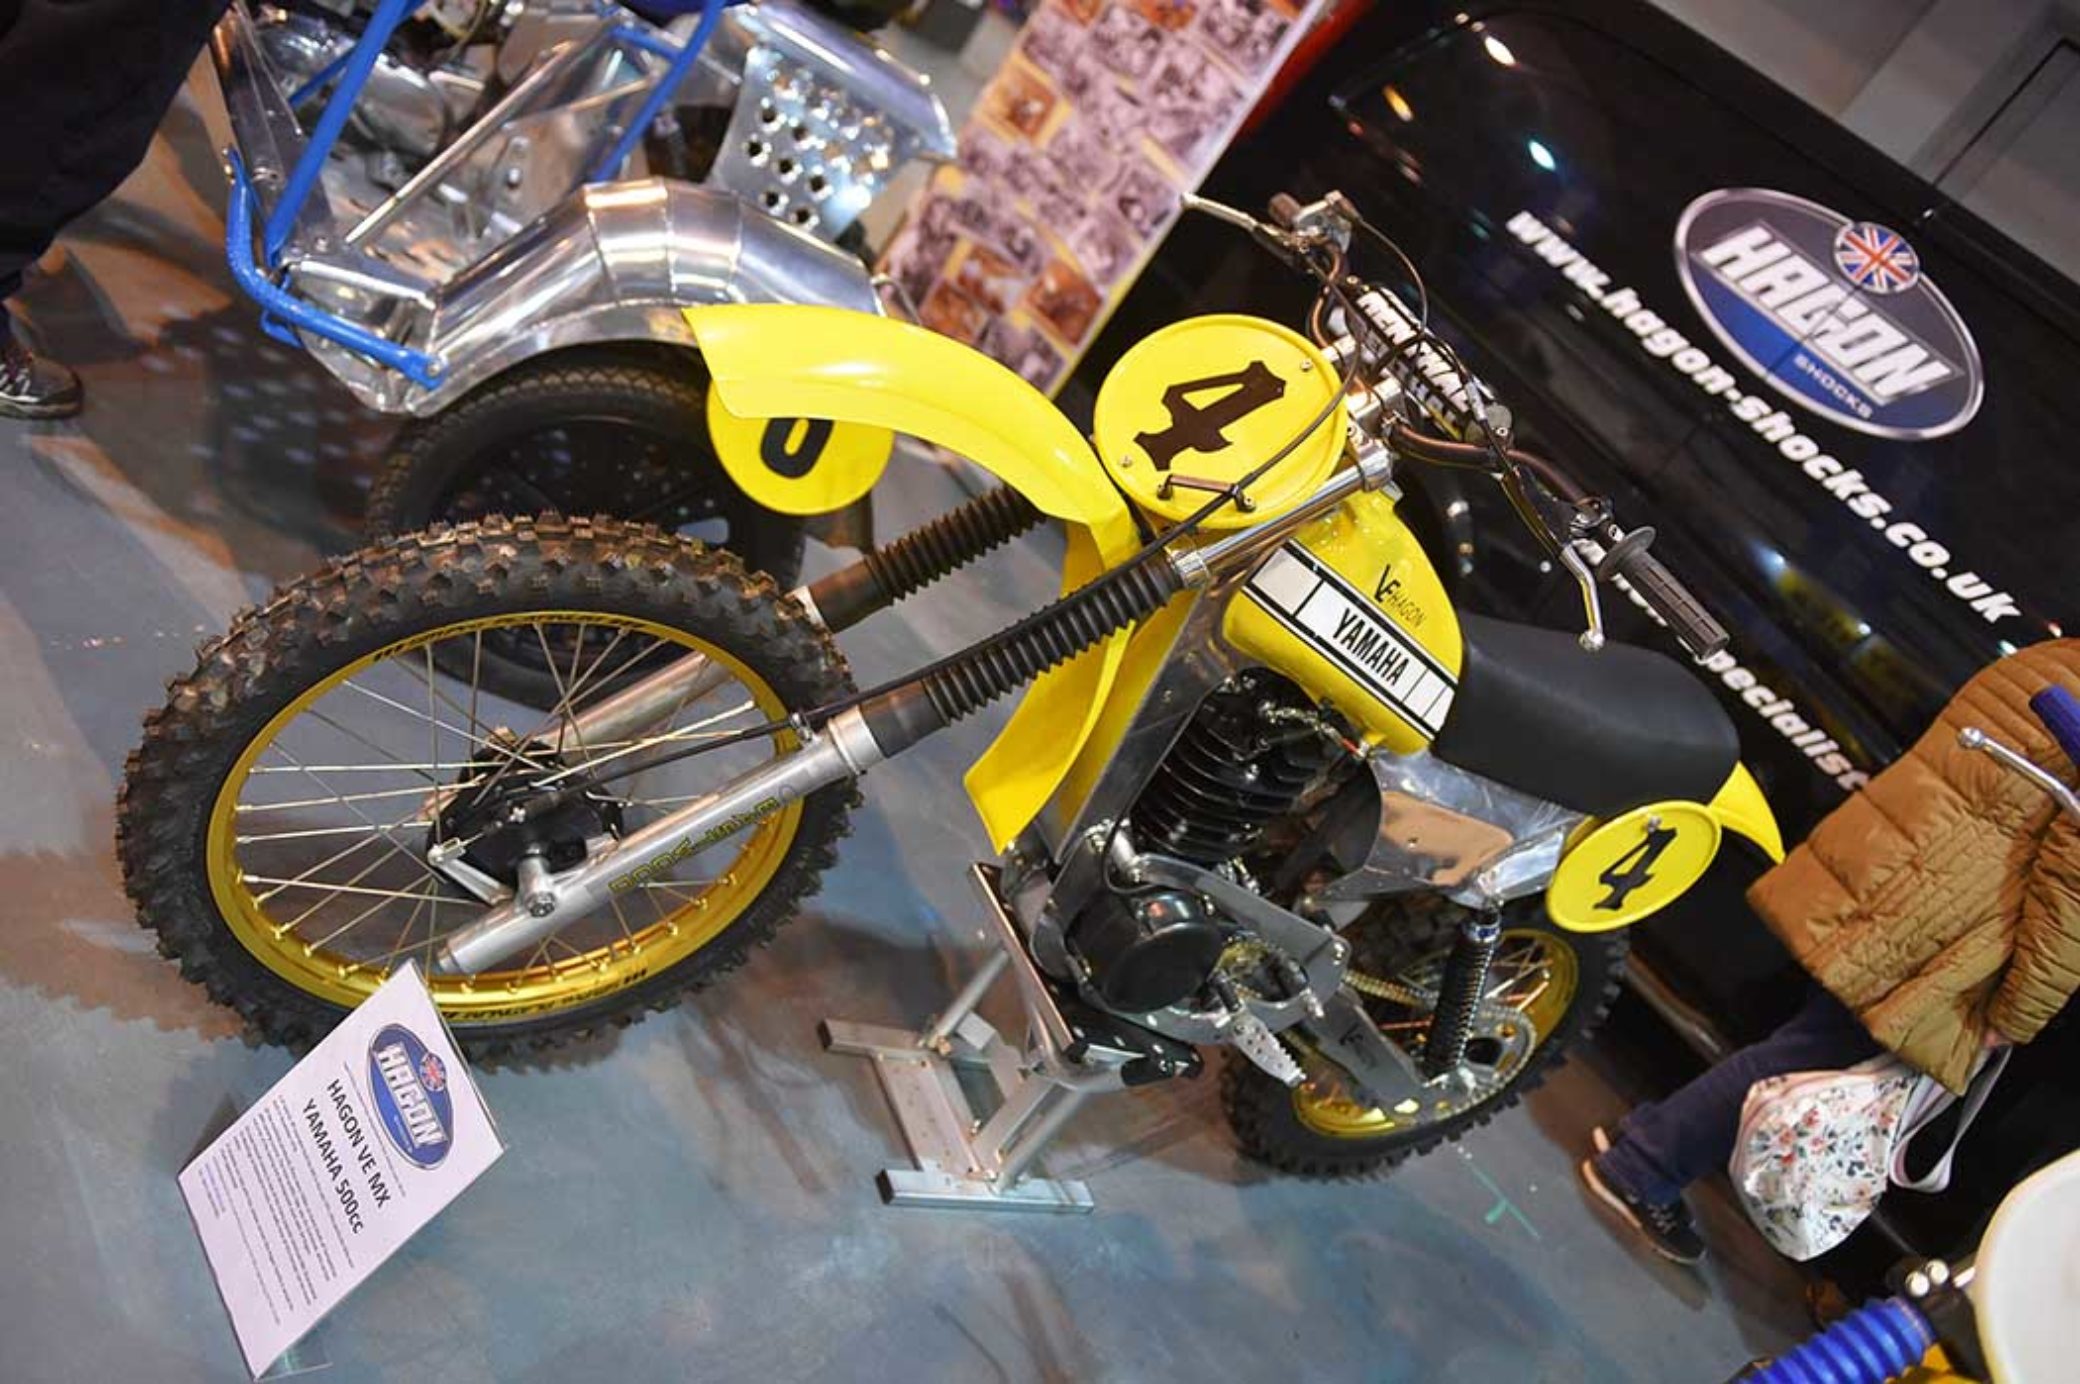 The Classic Dirt Bike Show was once again a massive success